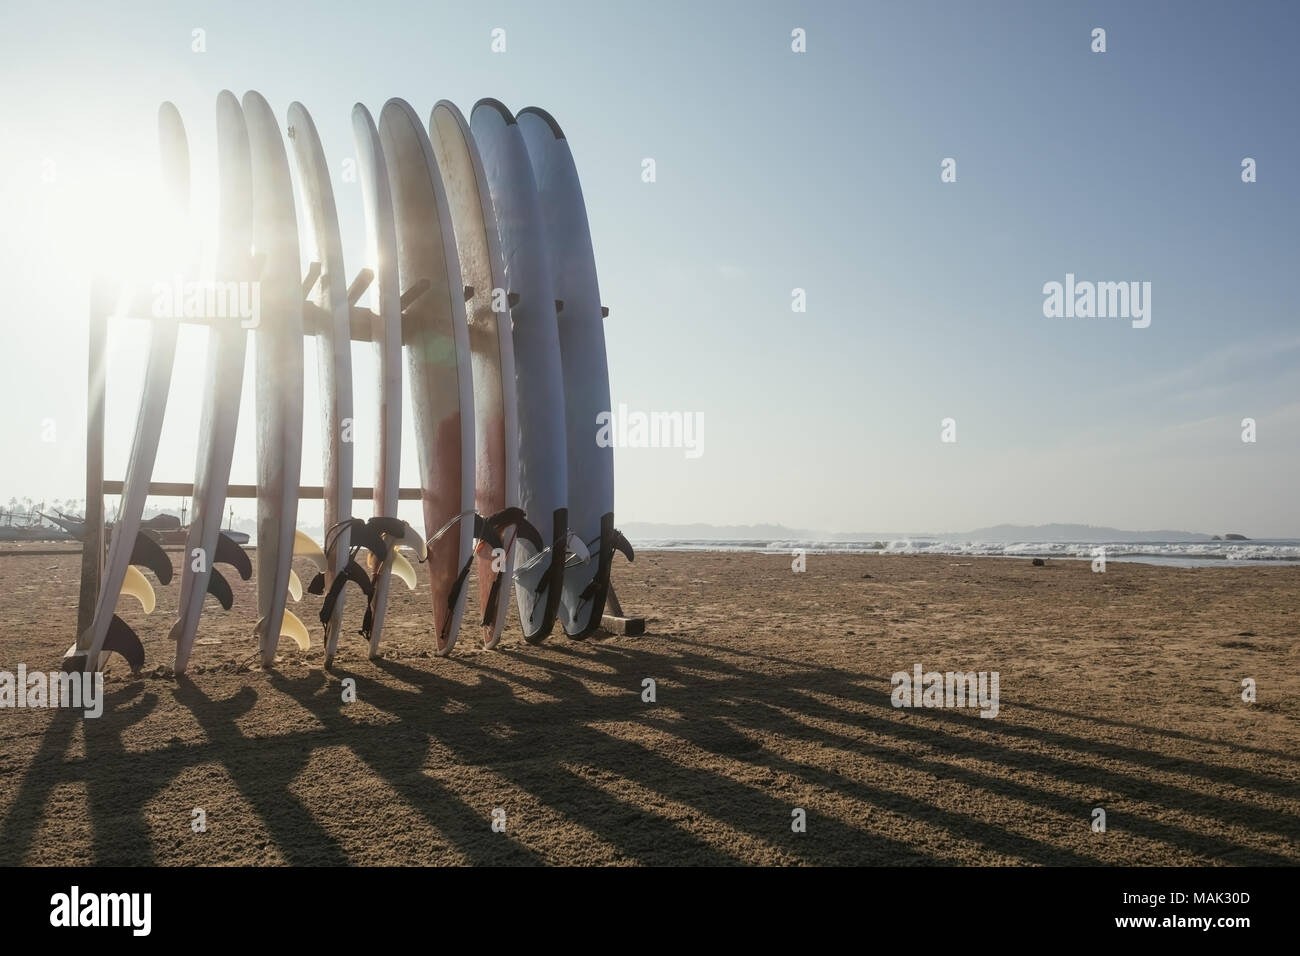 Several long boards for surfing standing on beach in the morning. Concept of active sport during vacation Stock Photo